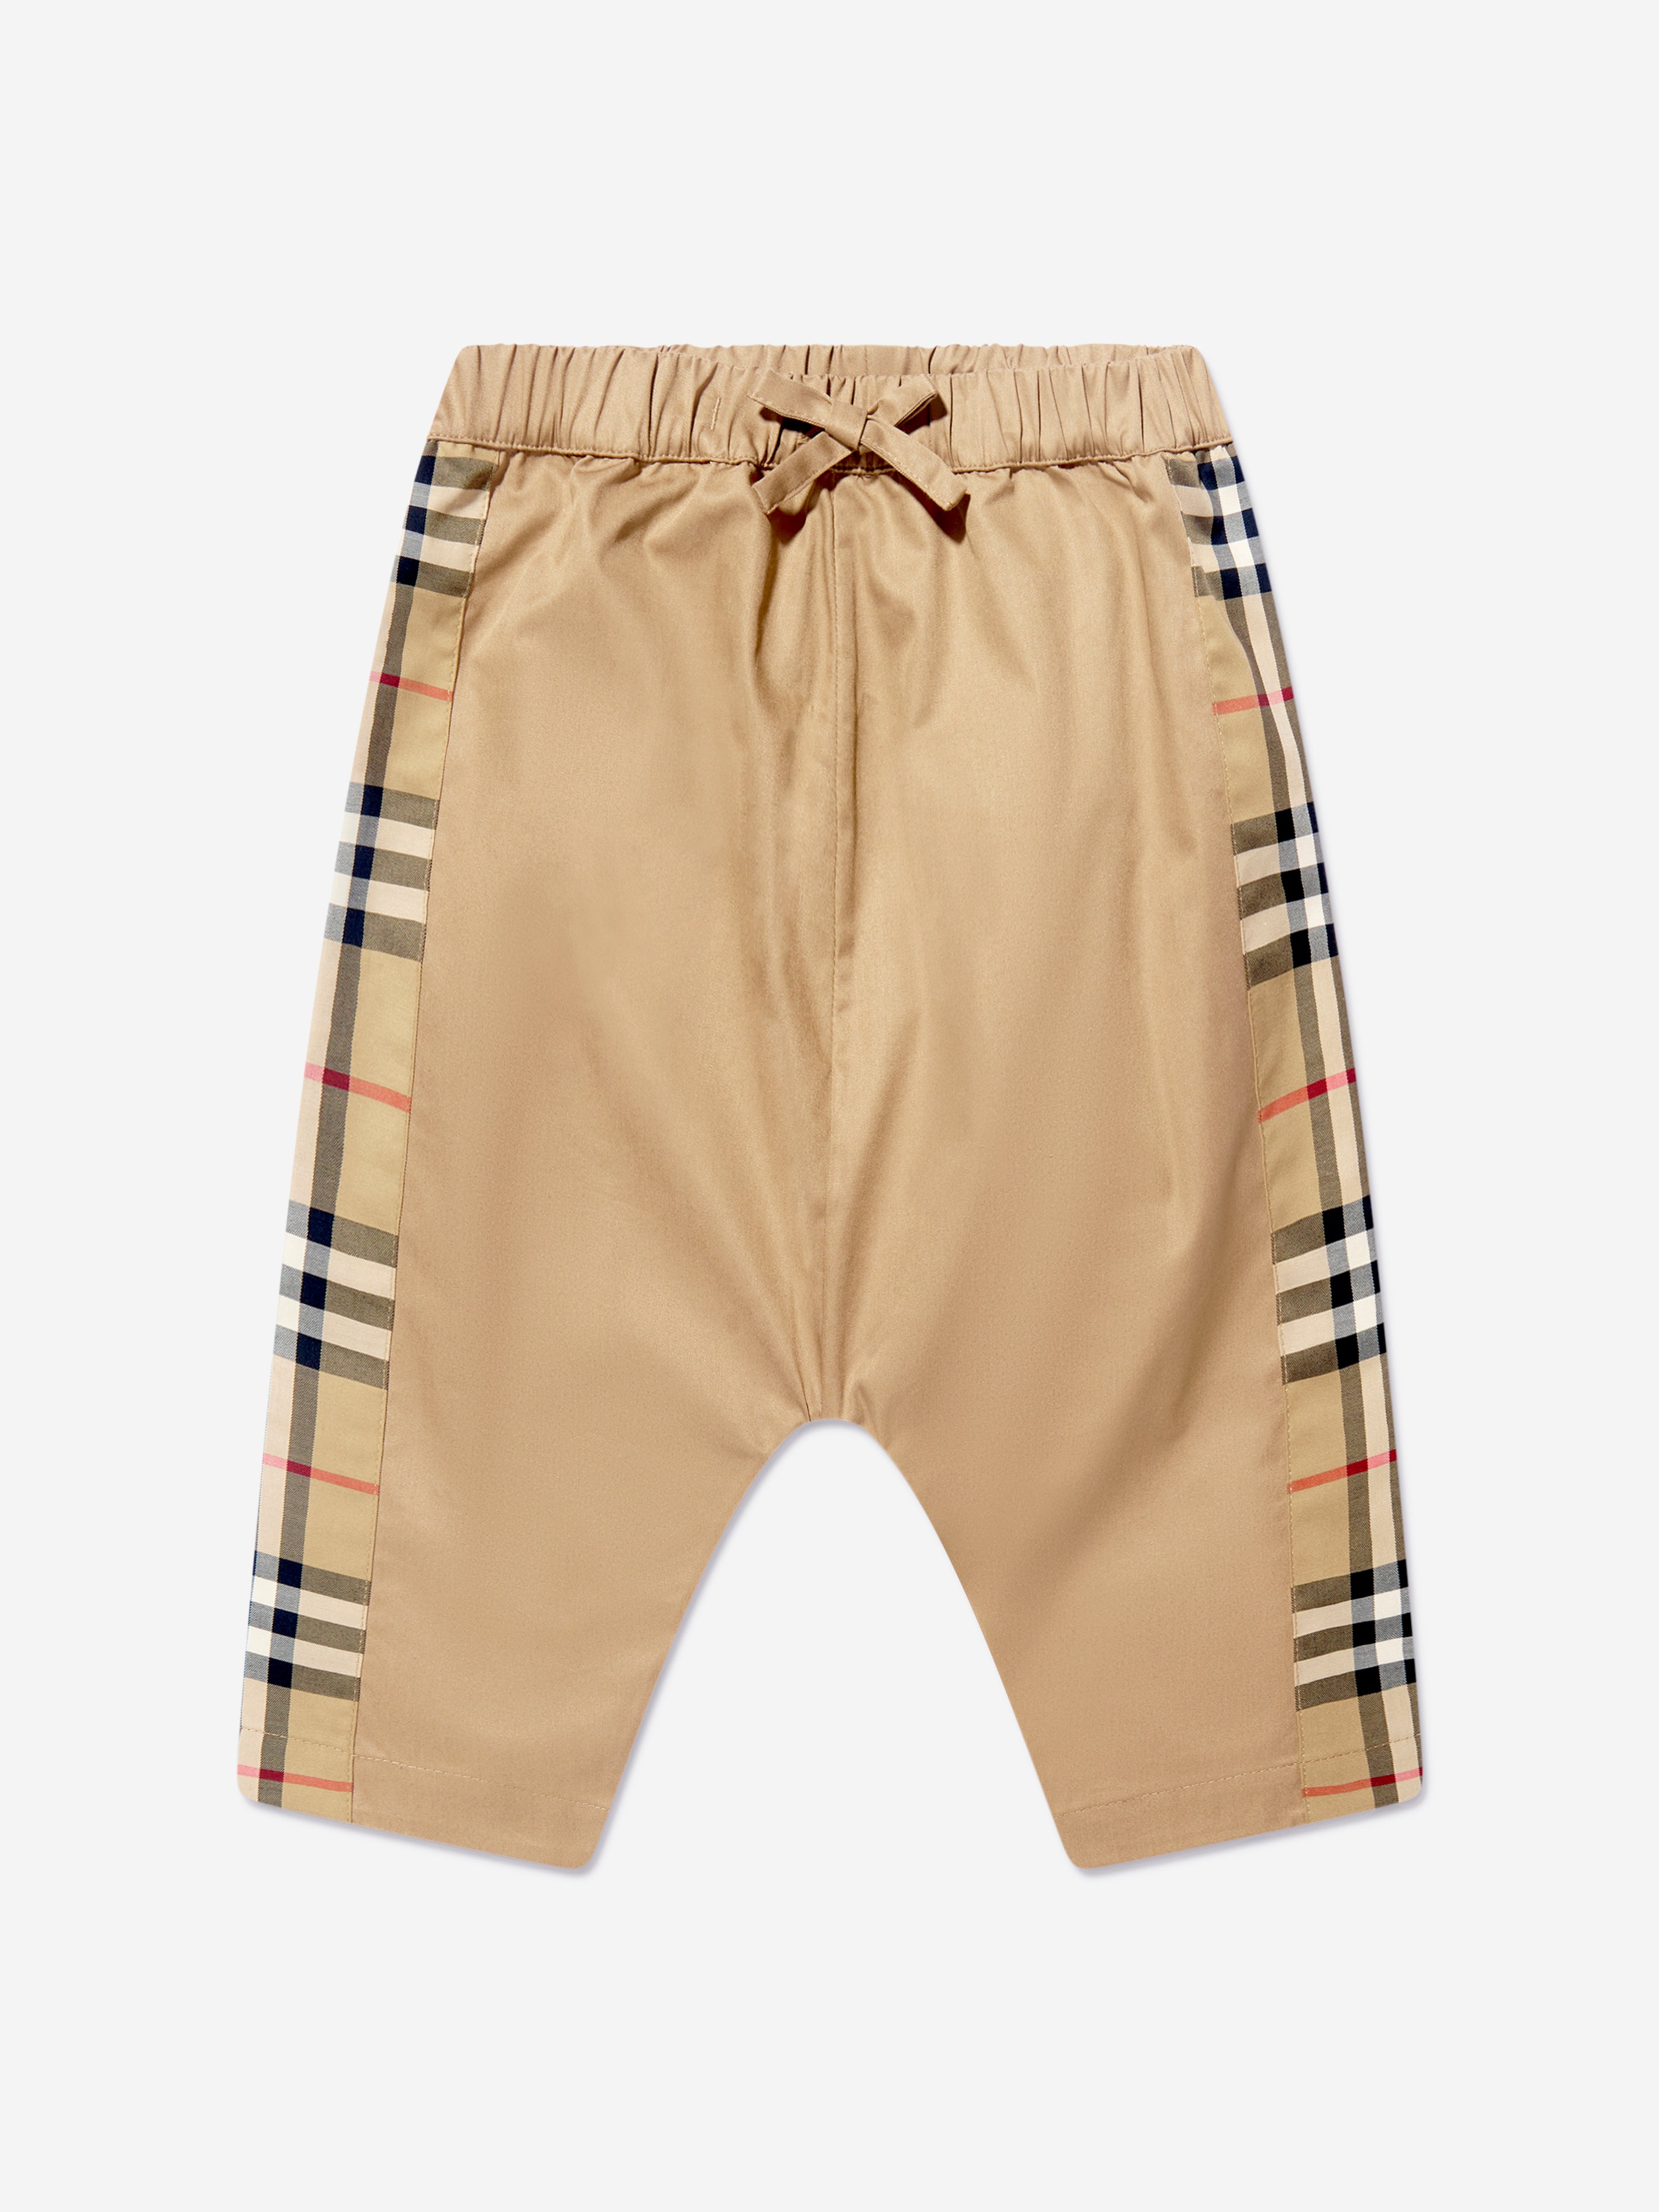 Burberry Baby Boys Ronny Shorts In Beige